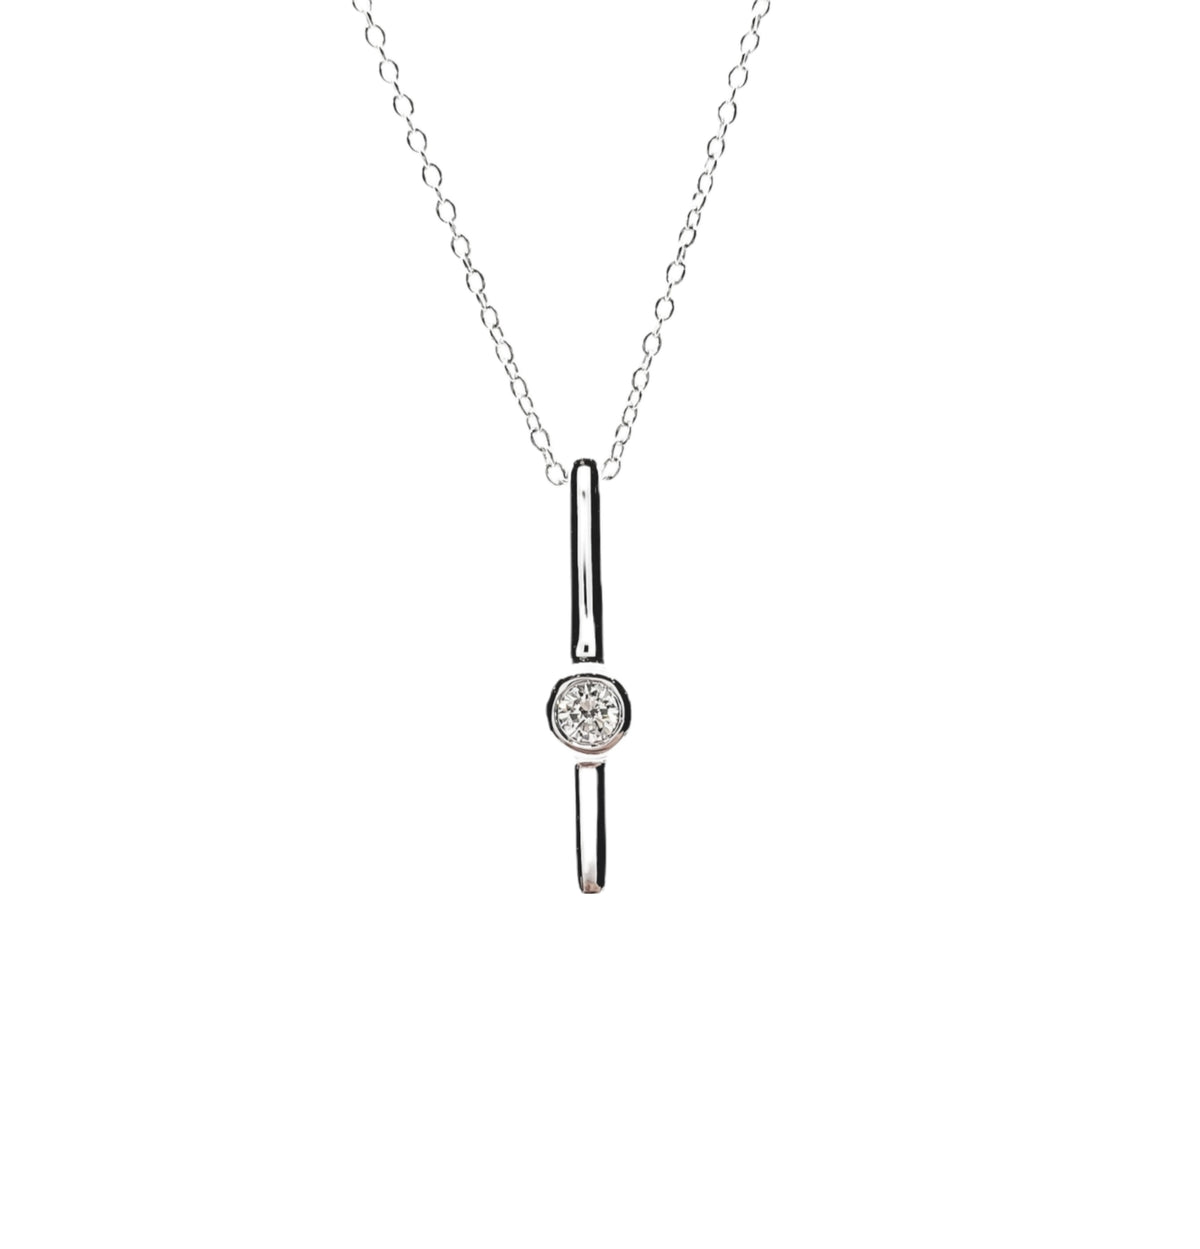 10K White Gold 0.06cttw Diamond Necklace with Cable Chain (Spring Clasp) - Adjustable 17 - 18 Inches